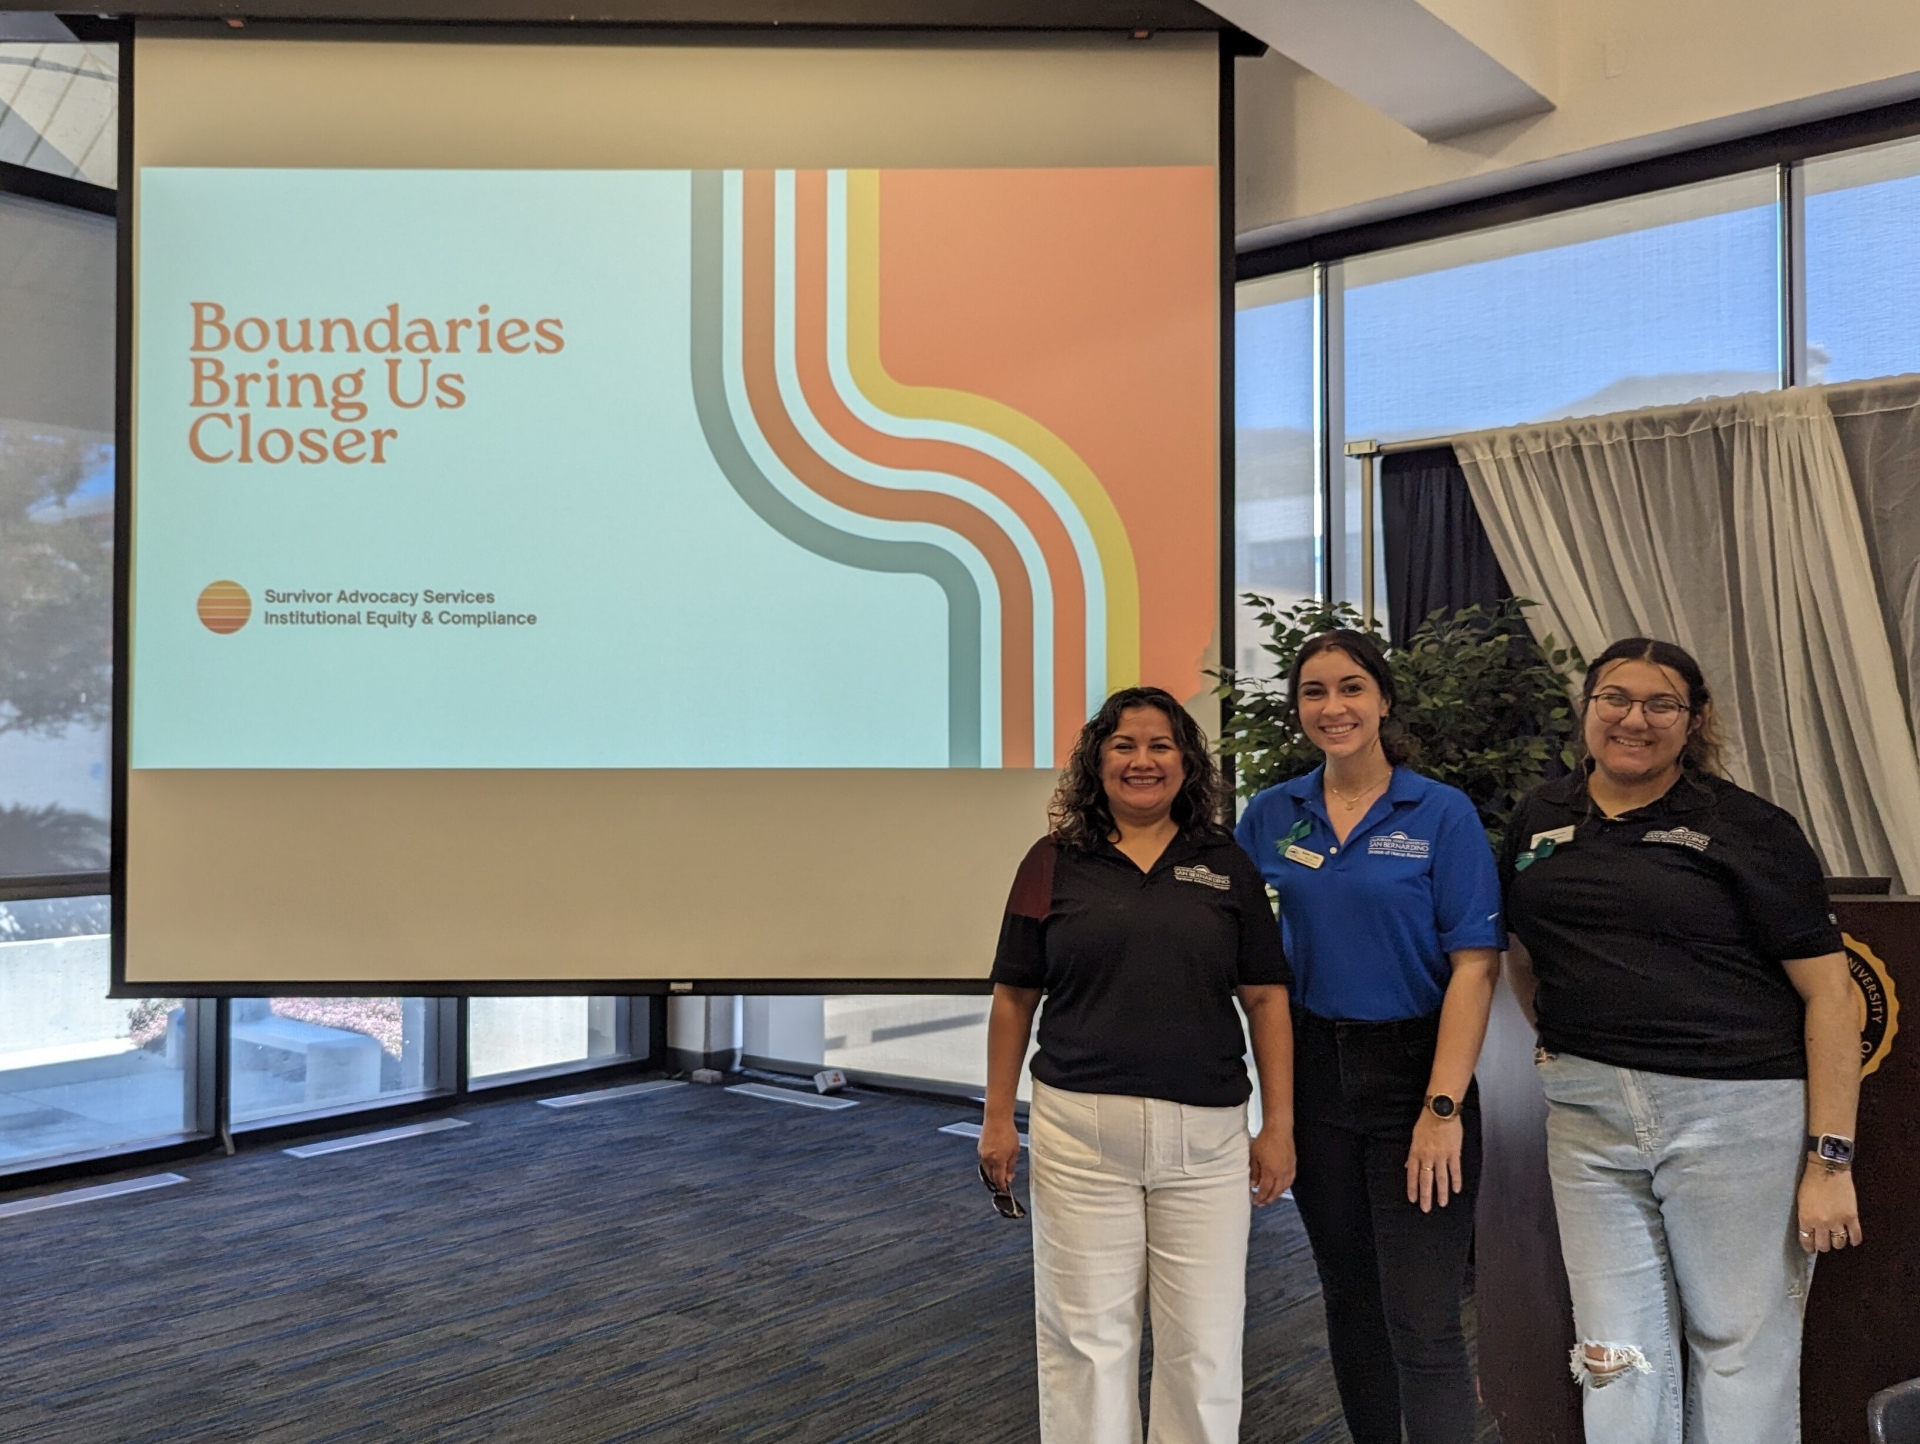 Three CSUSB staff stand in front of screen that reads "Boundaries Bring us Closer"